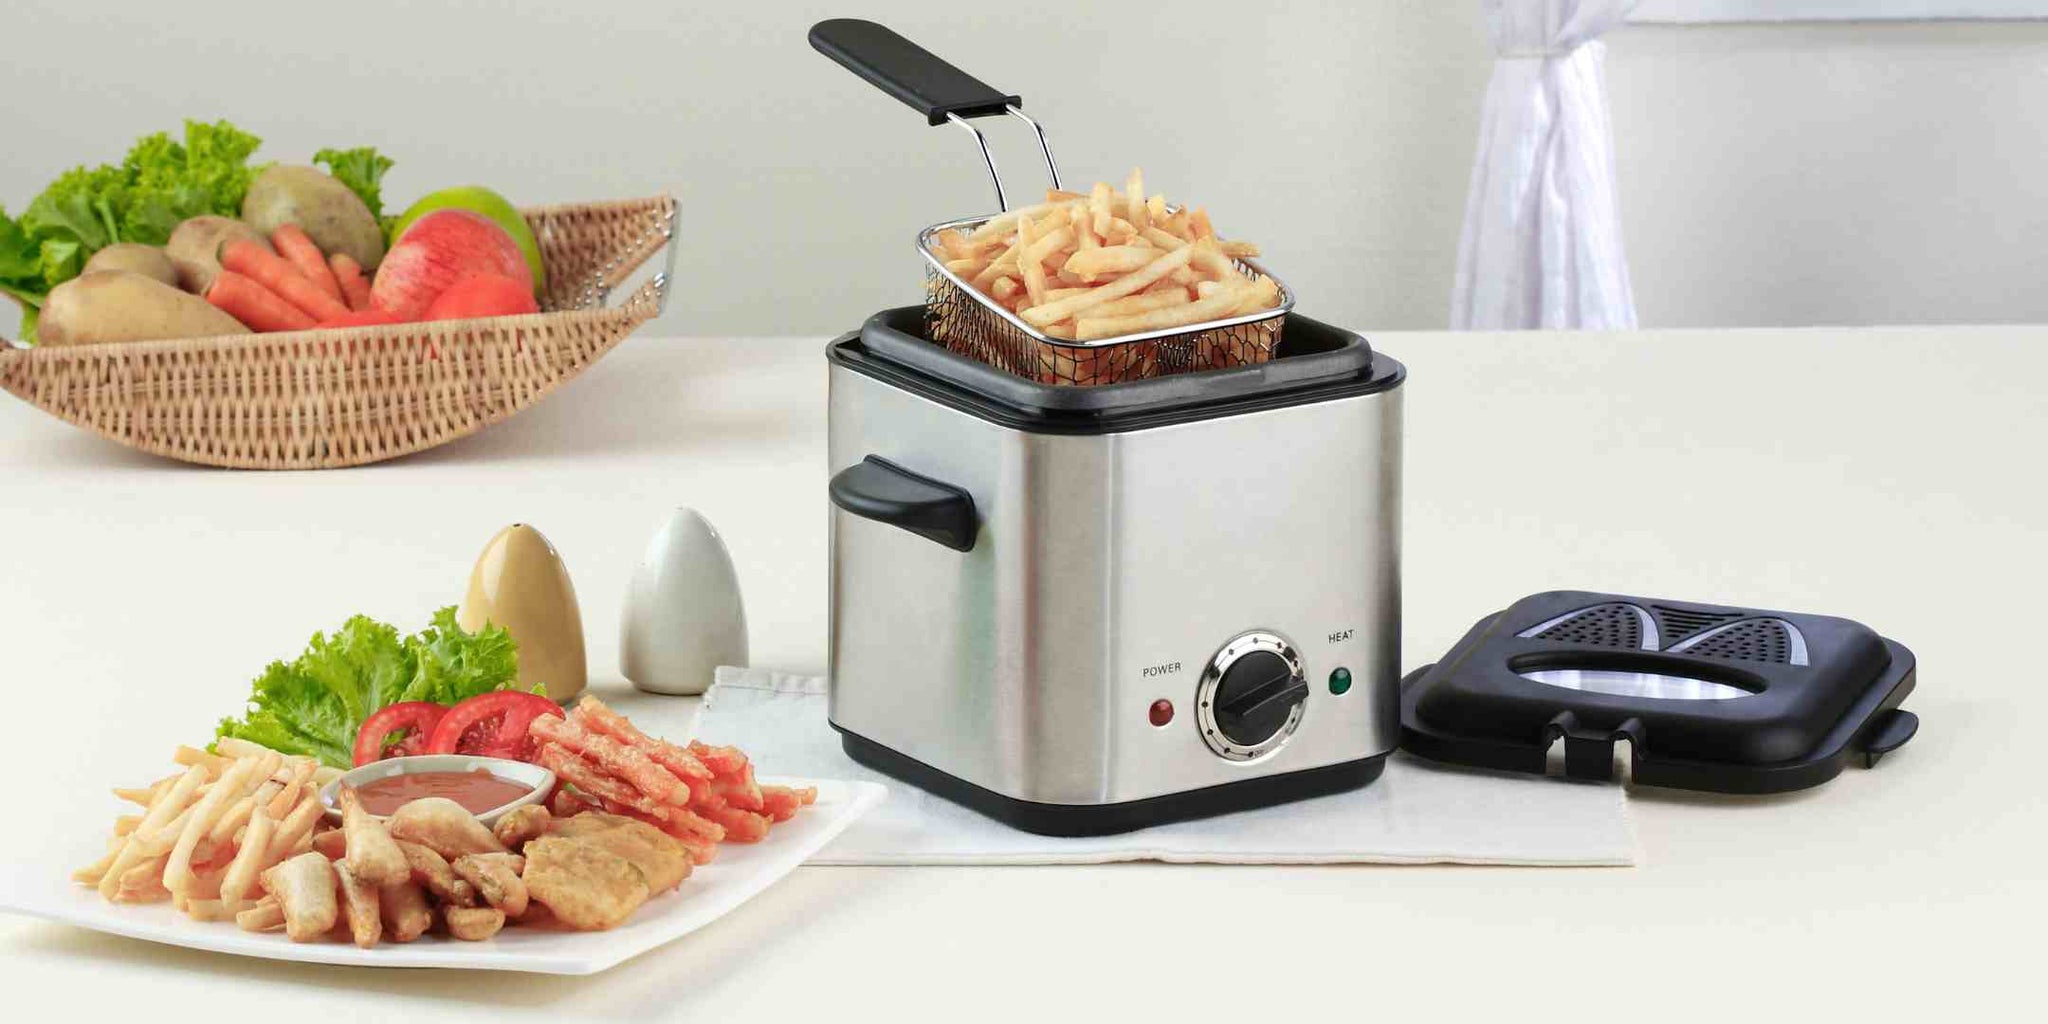 Steps To Deep Clean Your Deep Fryer